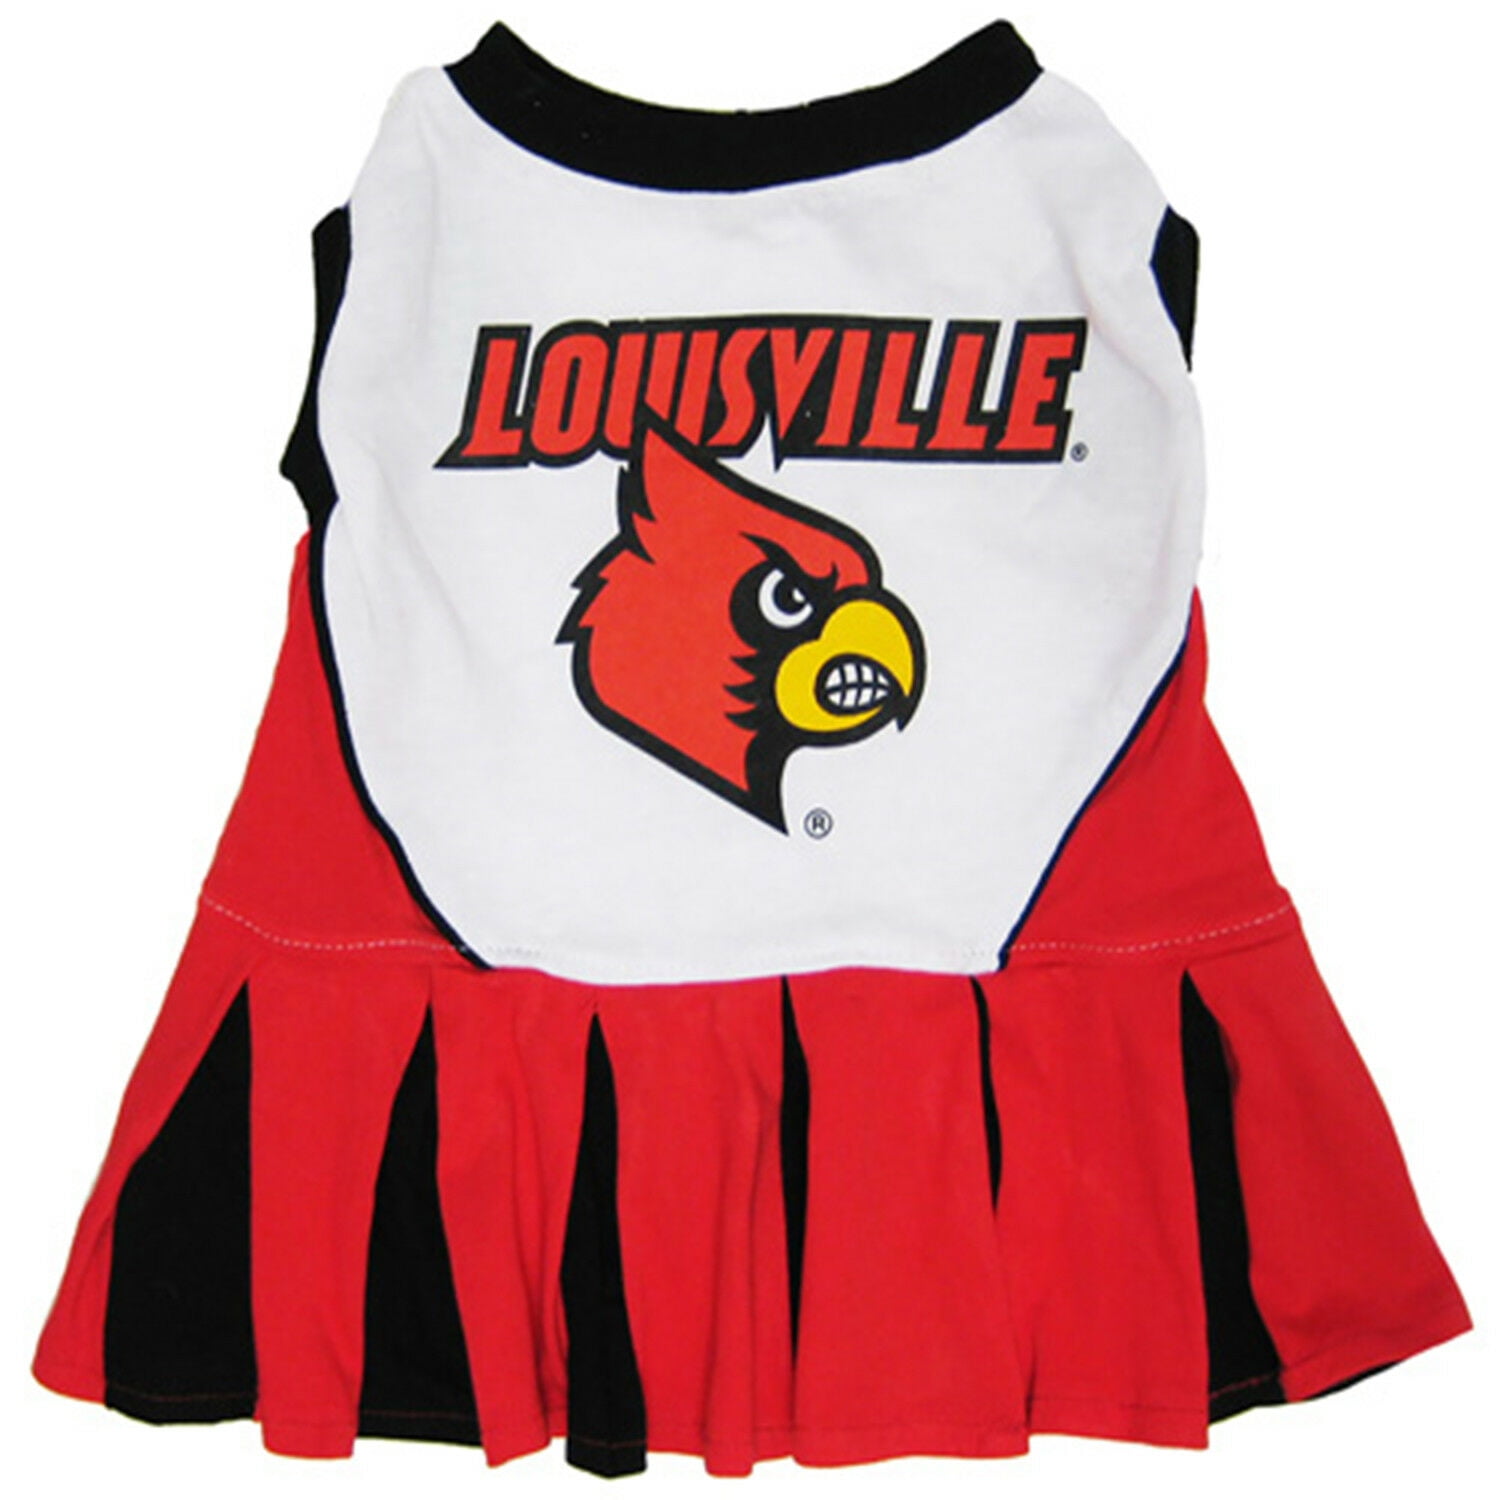 Pets First Collegiate Louisville Cardinals Pet Dog Sweater - Licensed 100%  Warm Acrylic knitted. 44 College Teams, 4 sizes